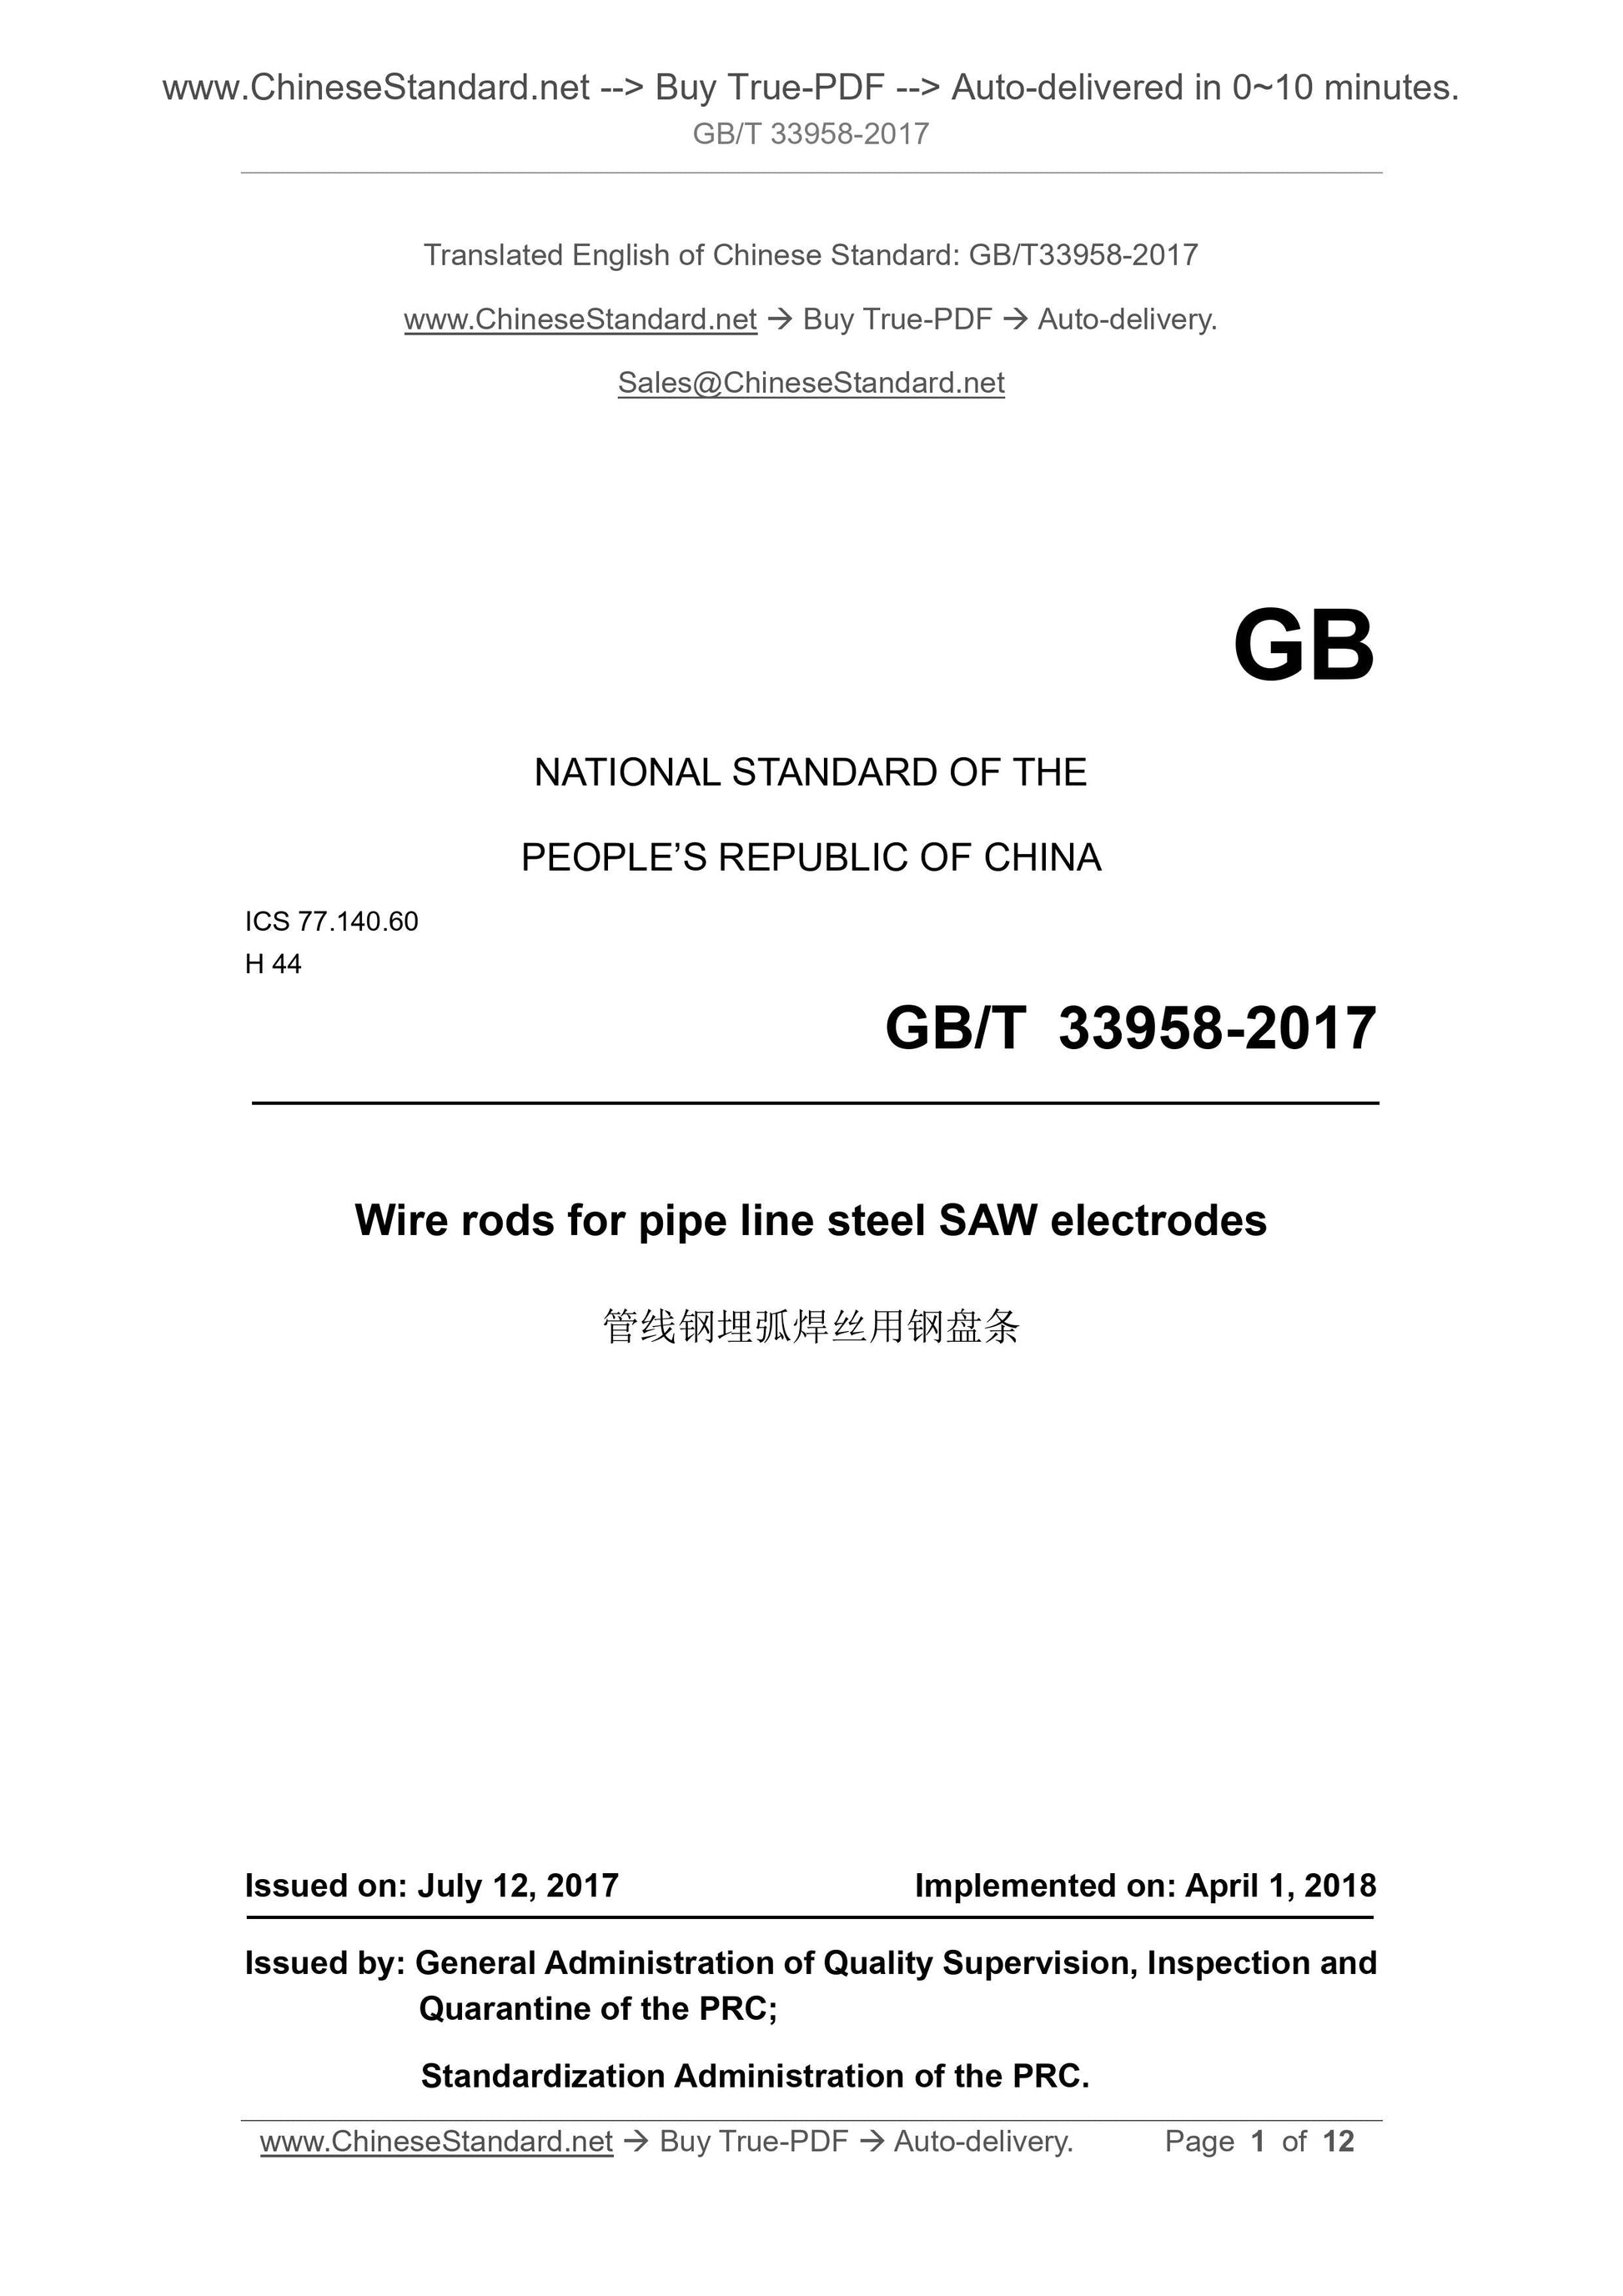 GB/T 33958-2017 Page 1